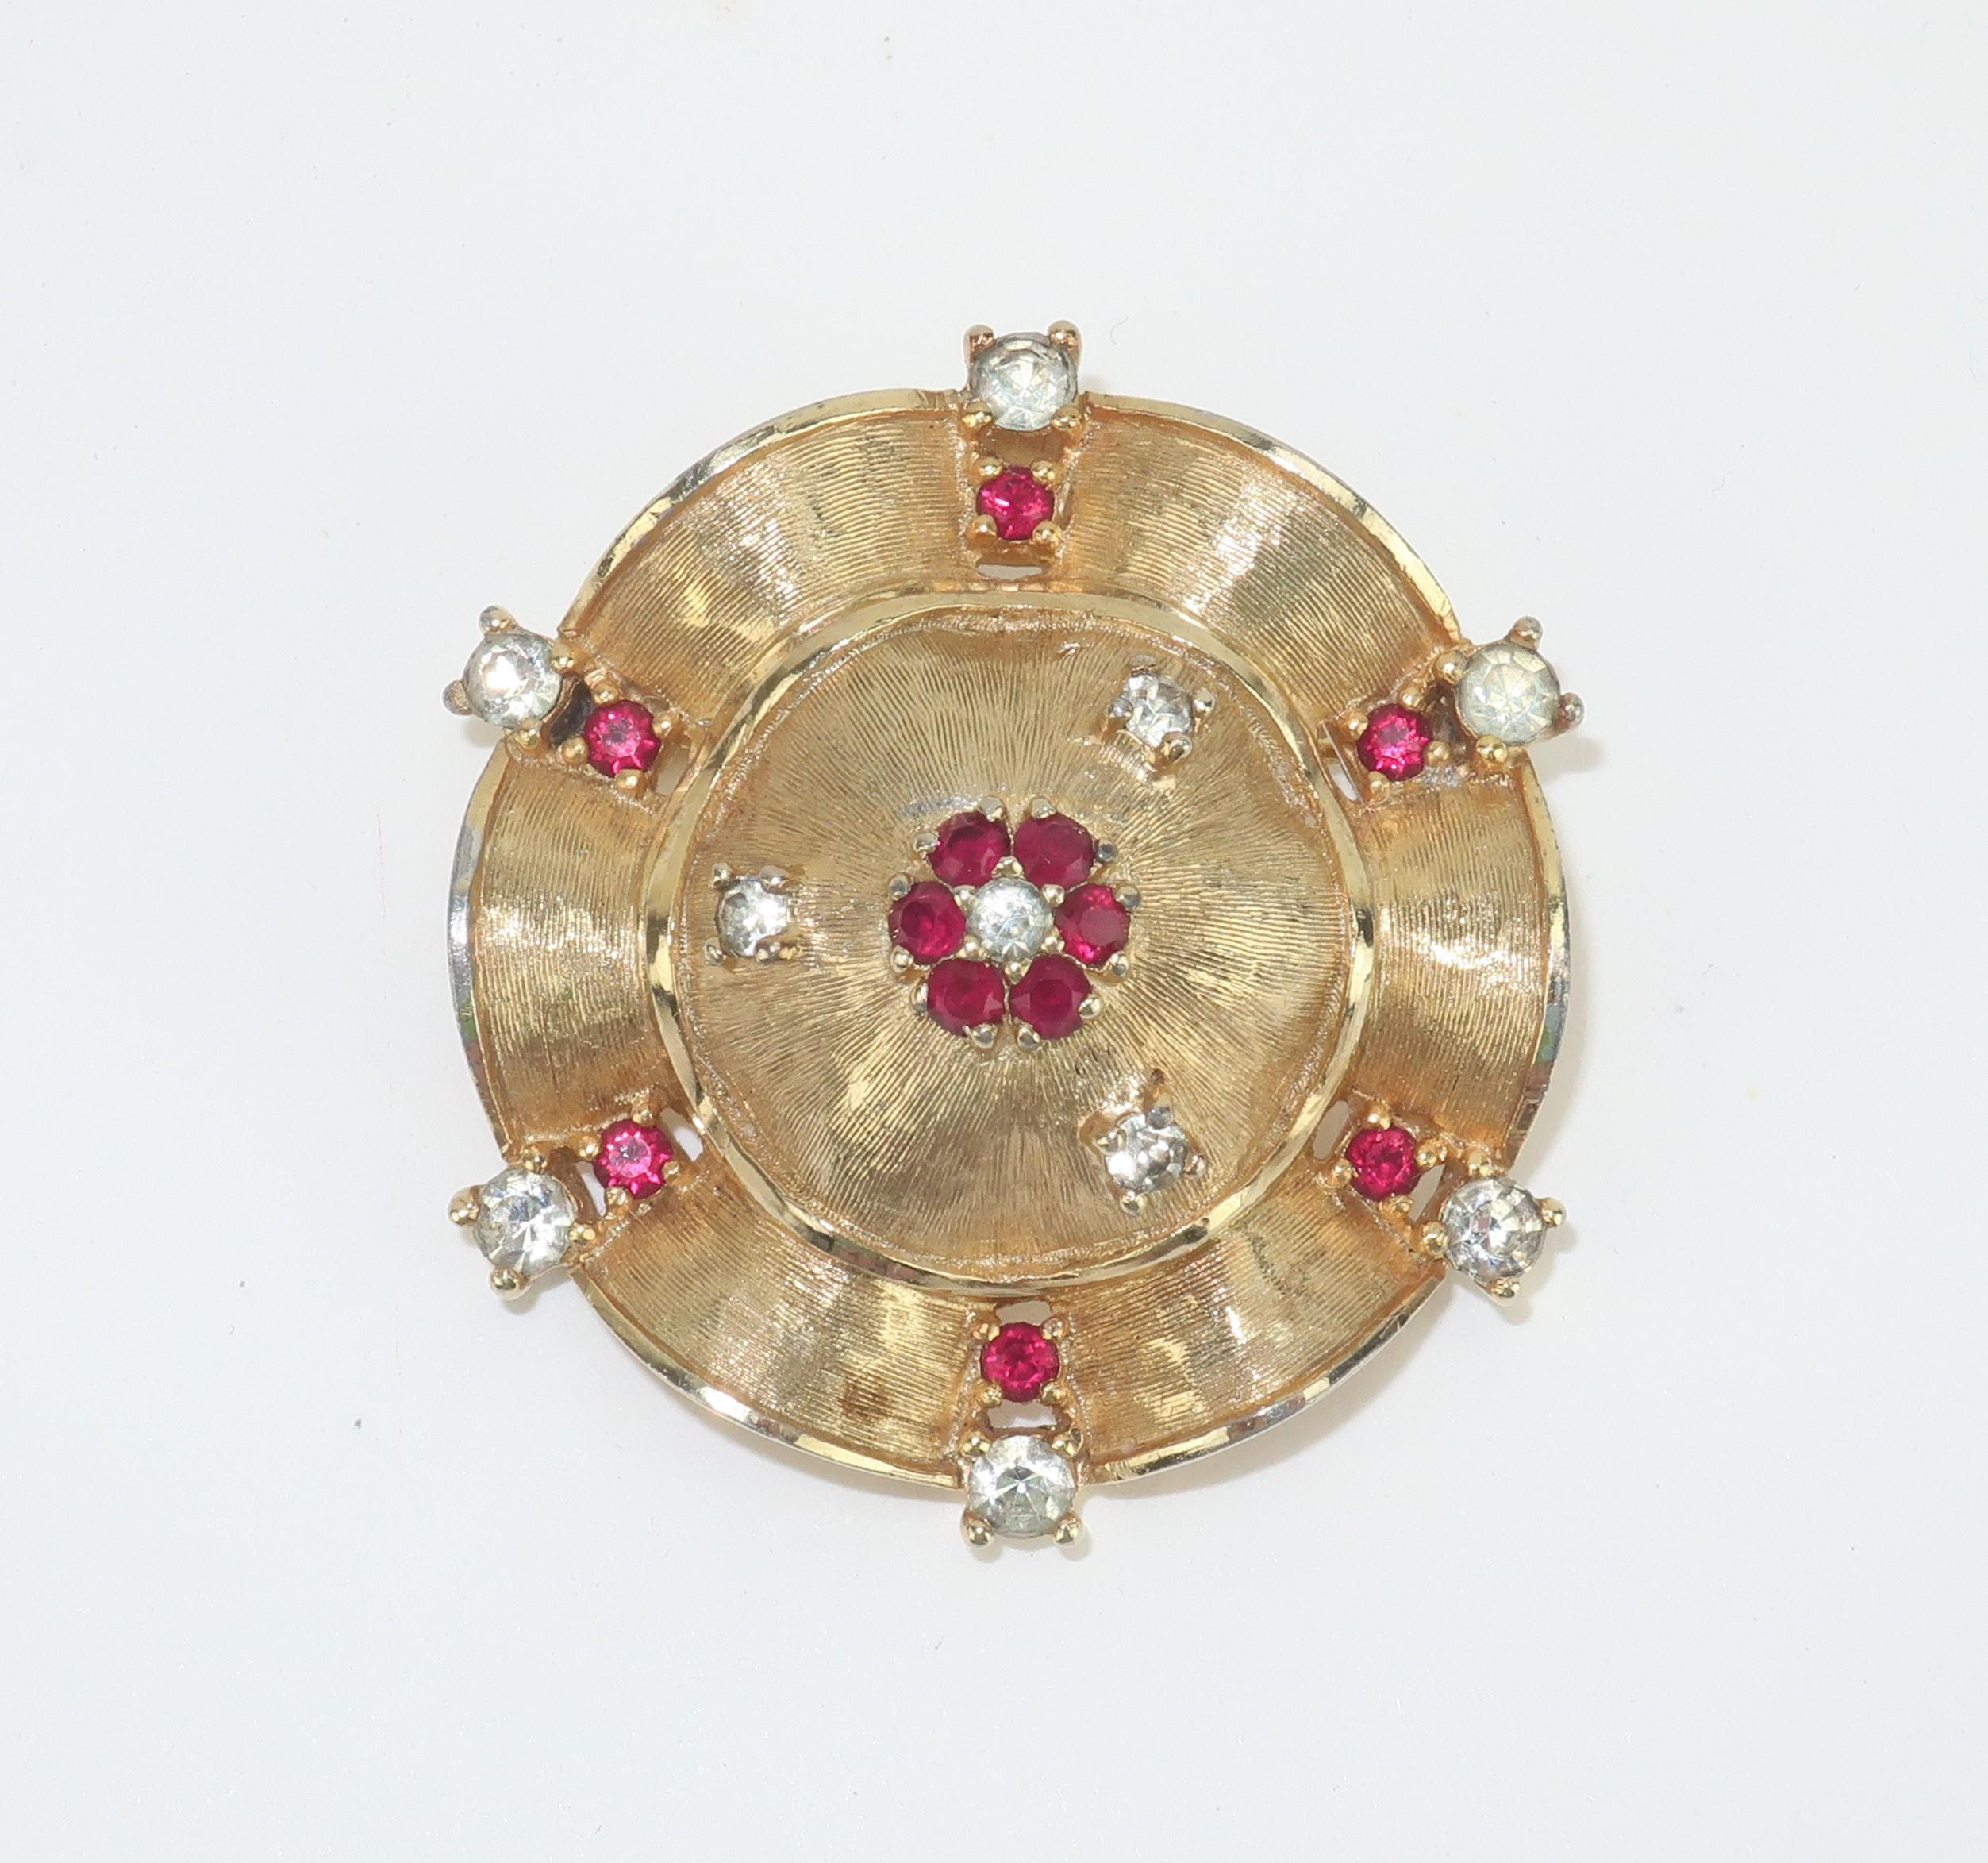 Jomaz put the fabulous in faux with their lovely costume jewelry creations that mirror the quality and style of fine jewelry.  This gold tone brooch is a modest size with an elegant quality that will garner second glances and admiring looks.  The